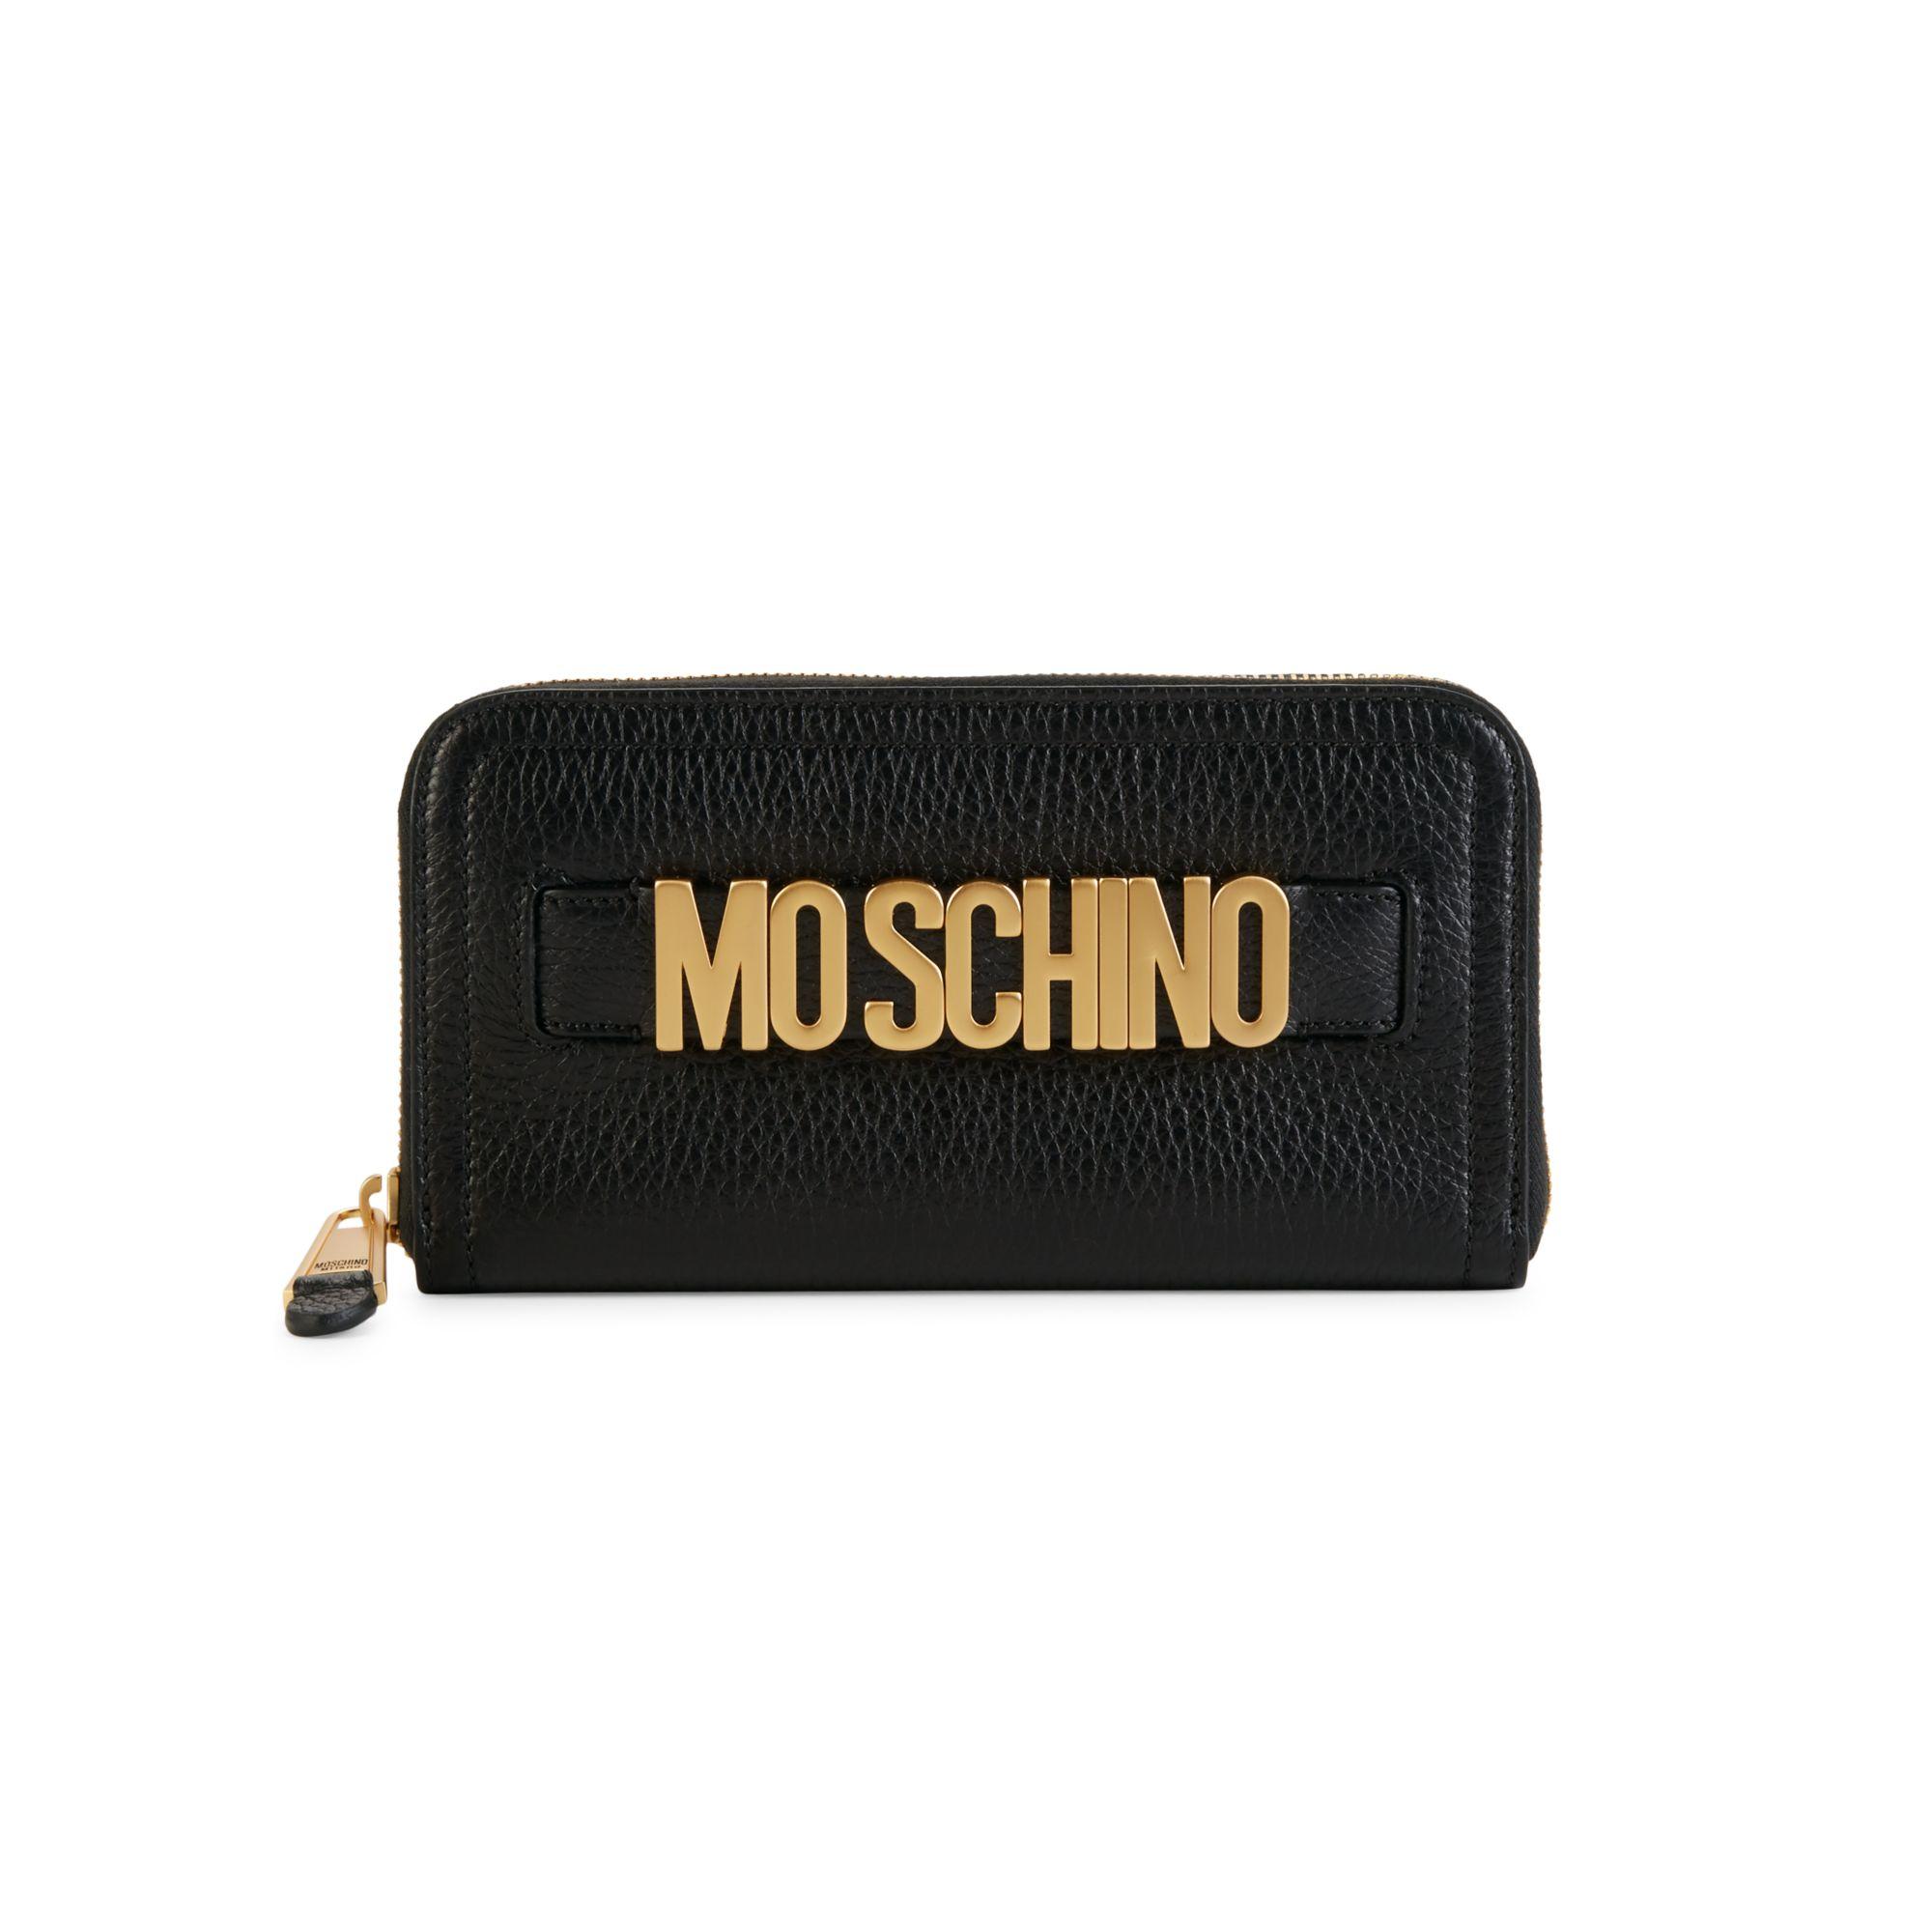 Moschino Pebbled Leather Zip-around Wallet in Black - Lyst